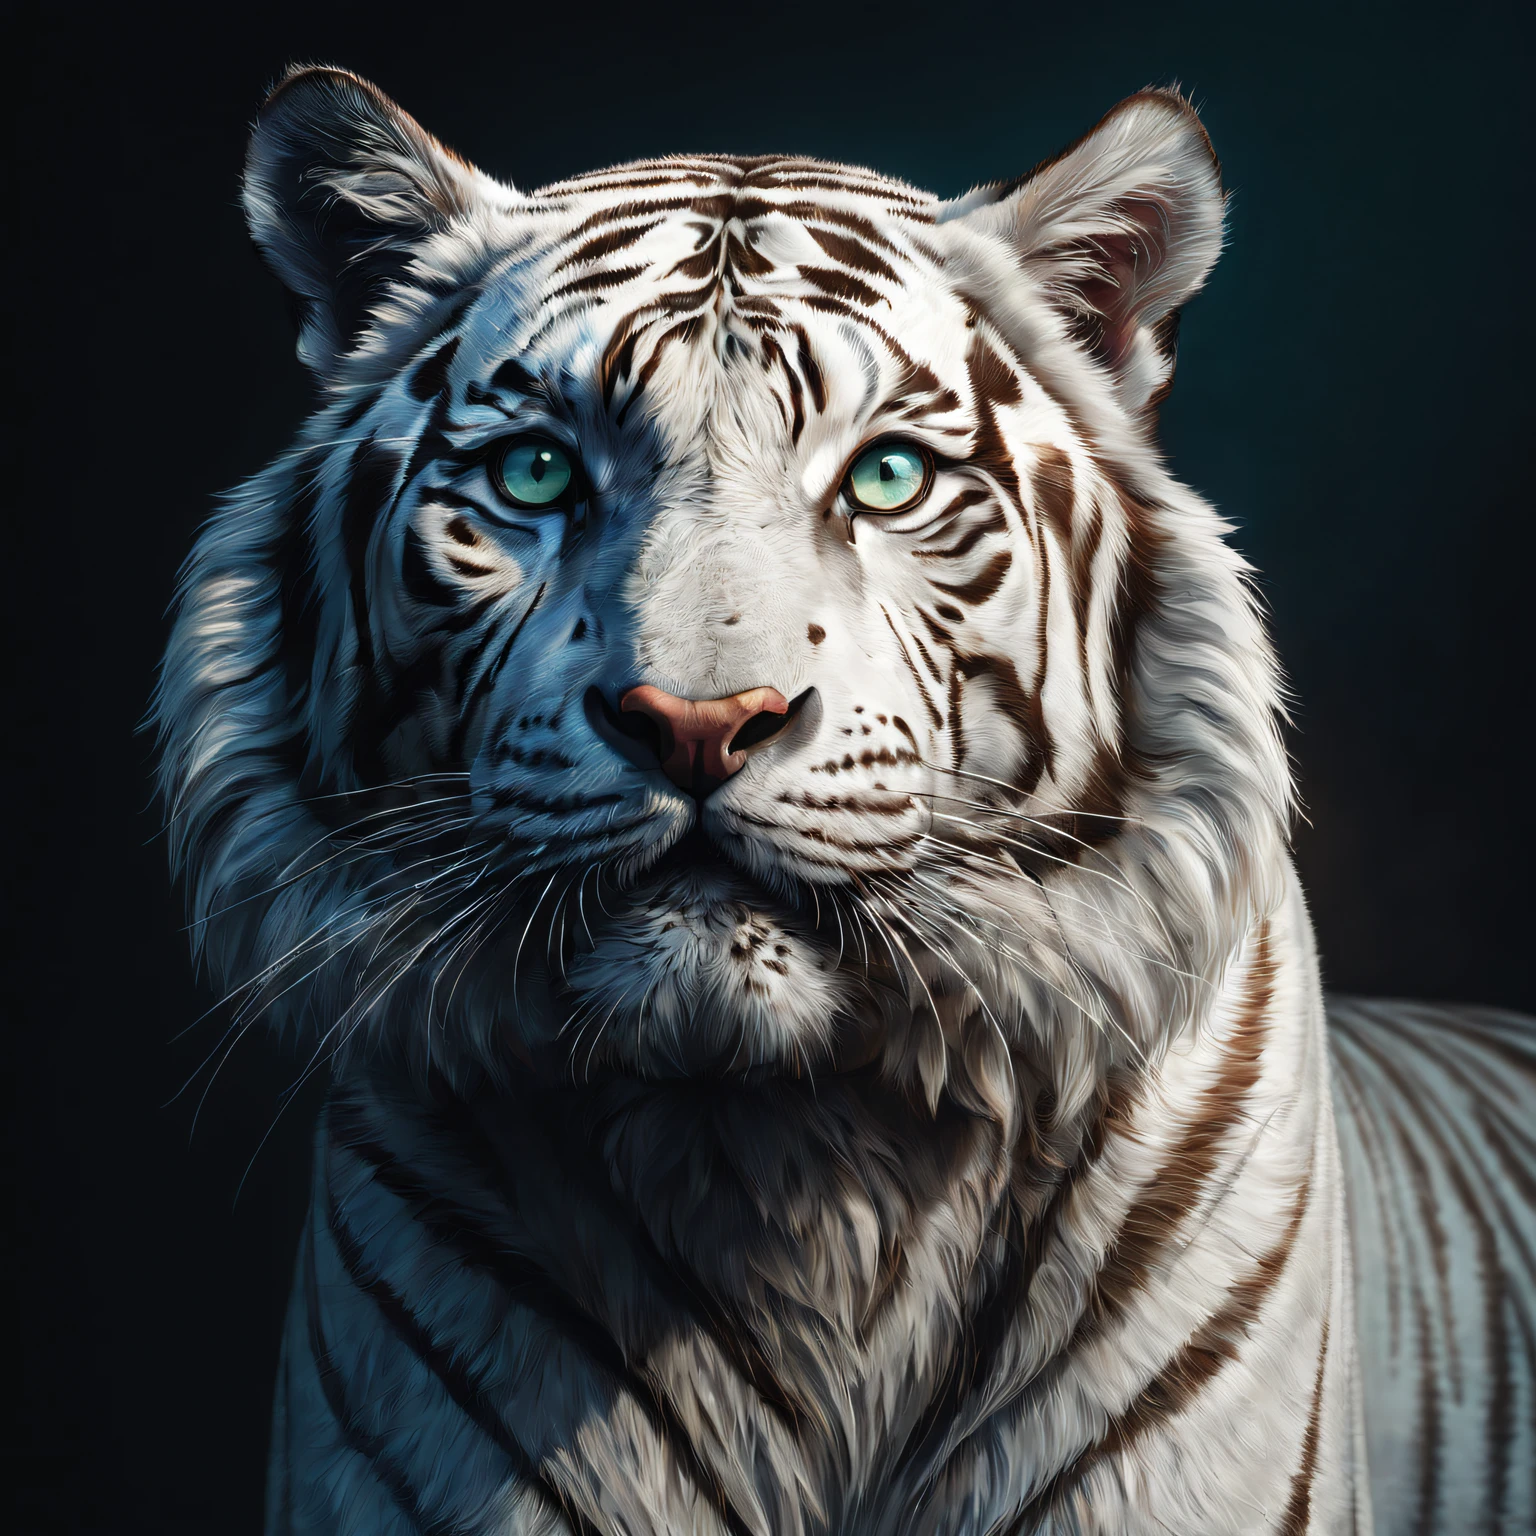 Best quality at best,ultra - detailed,actual,vivd colour,White Tiger,sportrait,illustratio,Focus sharp,Vibrant background,Delicate fur,Expressive eyes,Intense expression,Striking pose,majestic feeling,Stylized rendering,Beautiful contrast,Thick lines,Rich textures,a hint of fantasy,Unique character design,Colorful palette,dynamic compositions,dramatic lights,animal attributes,Emotional intensity,Lively brushstrokes,Strong sense of presence,noble existence,Powerful aura,Wonderful details,lifelike features,Surreal elements,a captivating gaze,condescending,Hypnotic eyes,Enigmatic Atmosphere,Vibrant brushstrokes,perfect anatomia,symbolic representation,heroic figure,Impressive figure,vivid imagination,awe-inspiring,Unforgettable artwork.photore, Studio lighting, Sony A7, 35mm, hyper realisitc, Large depth of field, concept-art, colours, the ultra-detailed, hyper realisitc, (Large depth of field), (Moody light), (ambient lights), ((Cinematic))。